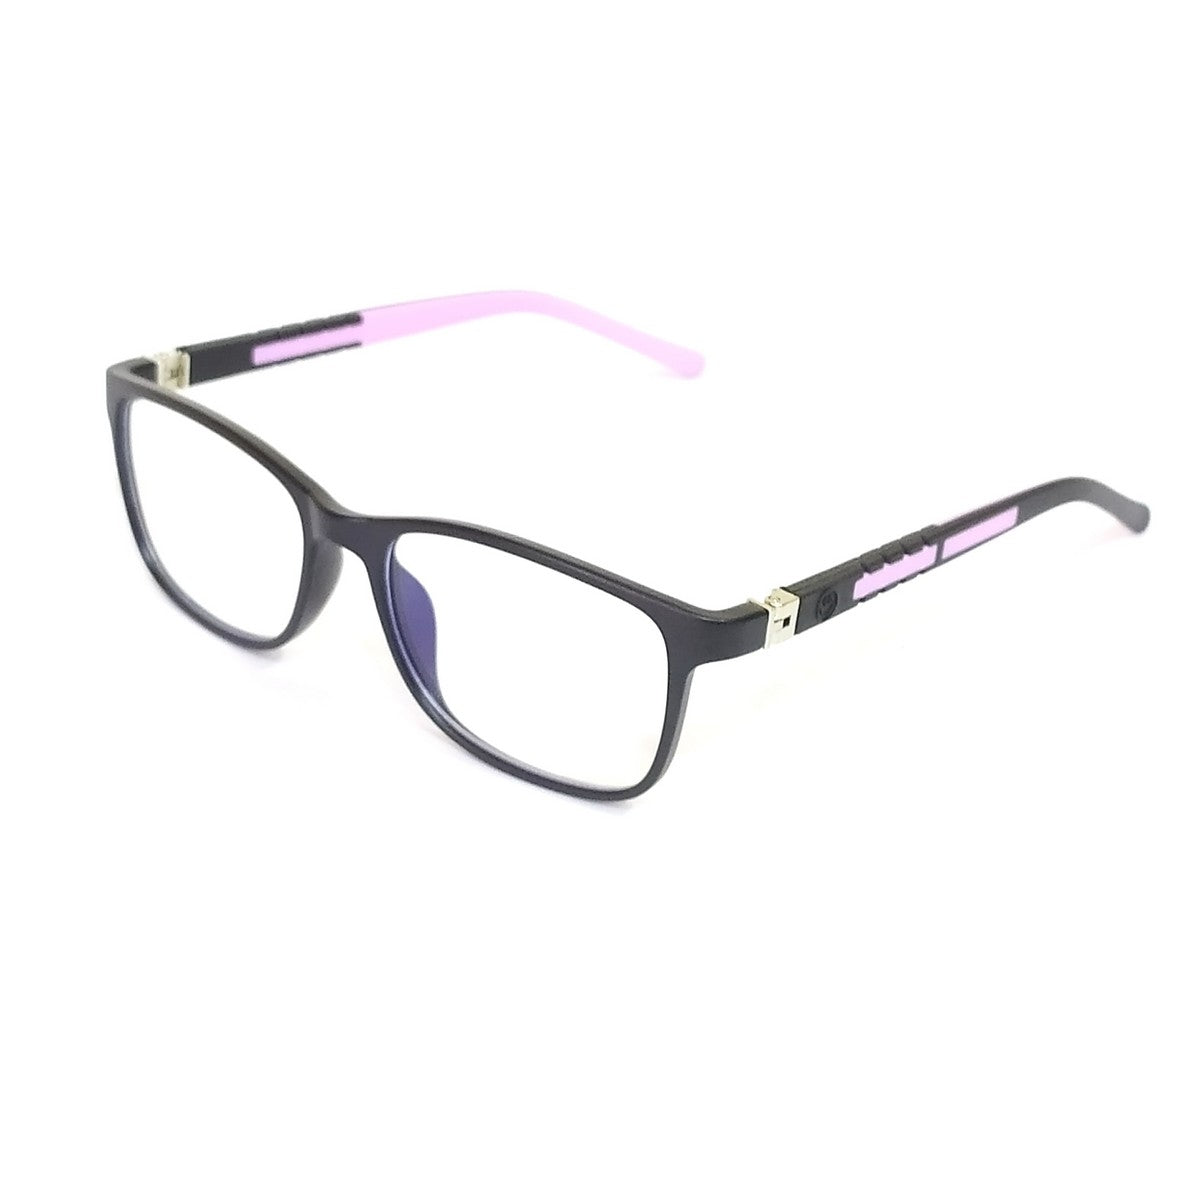 Stylish Black & Pink Square Kids Blue Light Blocking Glasses - Tailored for 6-10 Year Olds